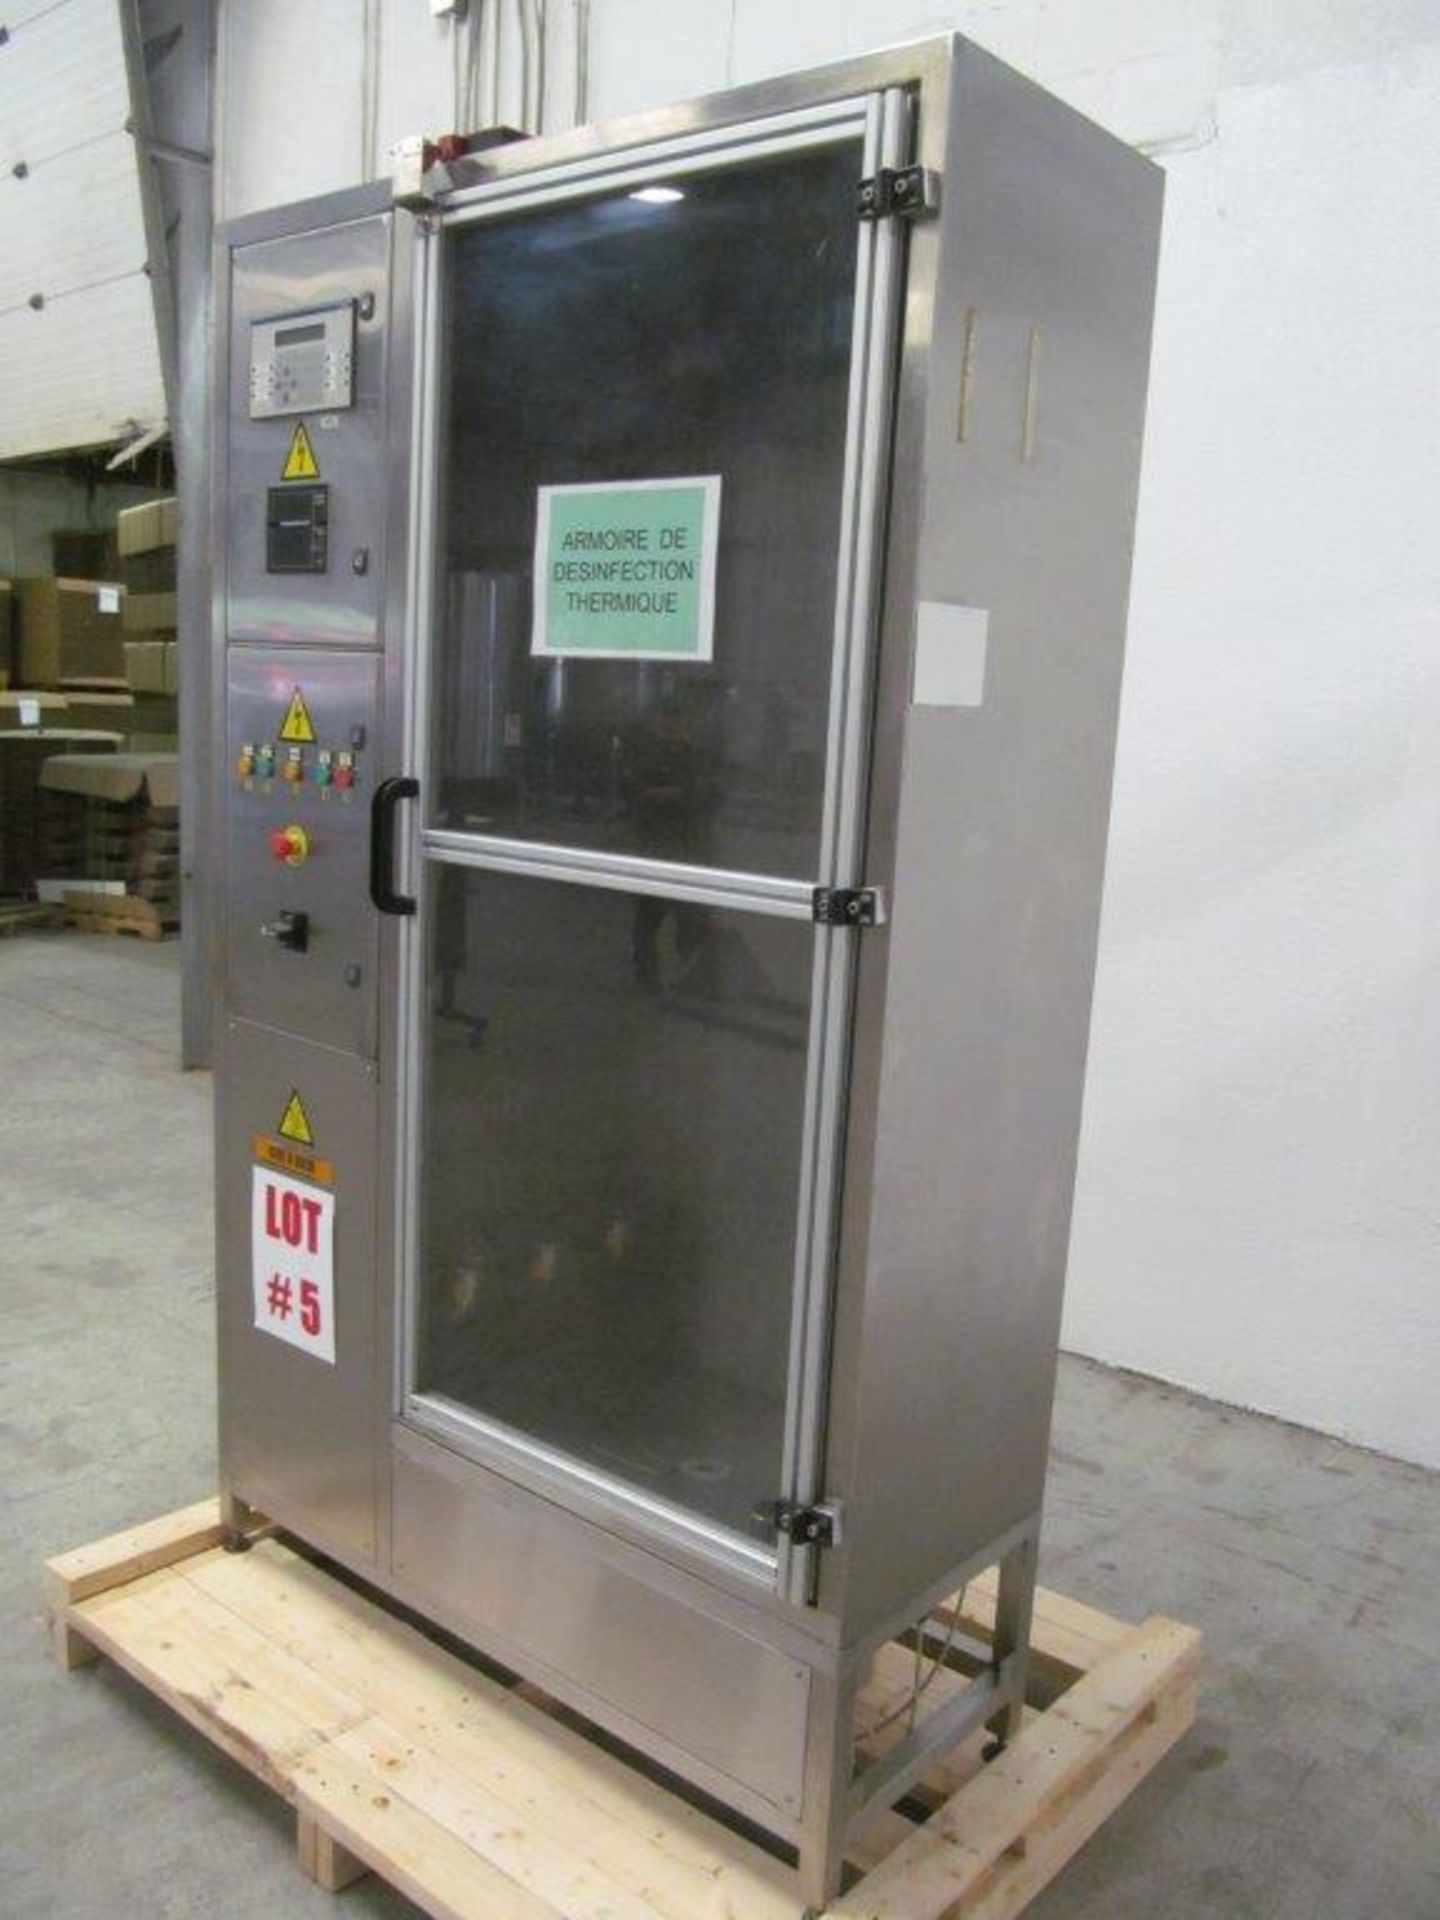 SOLERI THERMAL DESINFECTION CABINET, 200 HOURS,YEAR: 1999, 170 VOLTS, DIMENSION: 4X3X8, WEIGHT: - Image 3 of 6